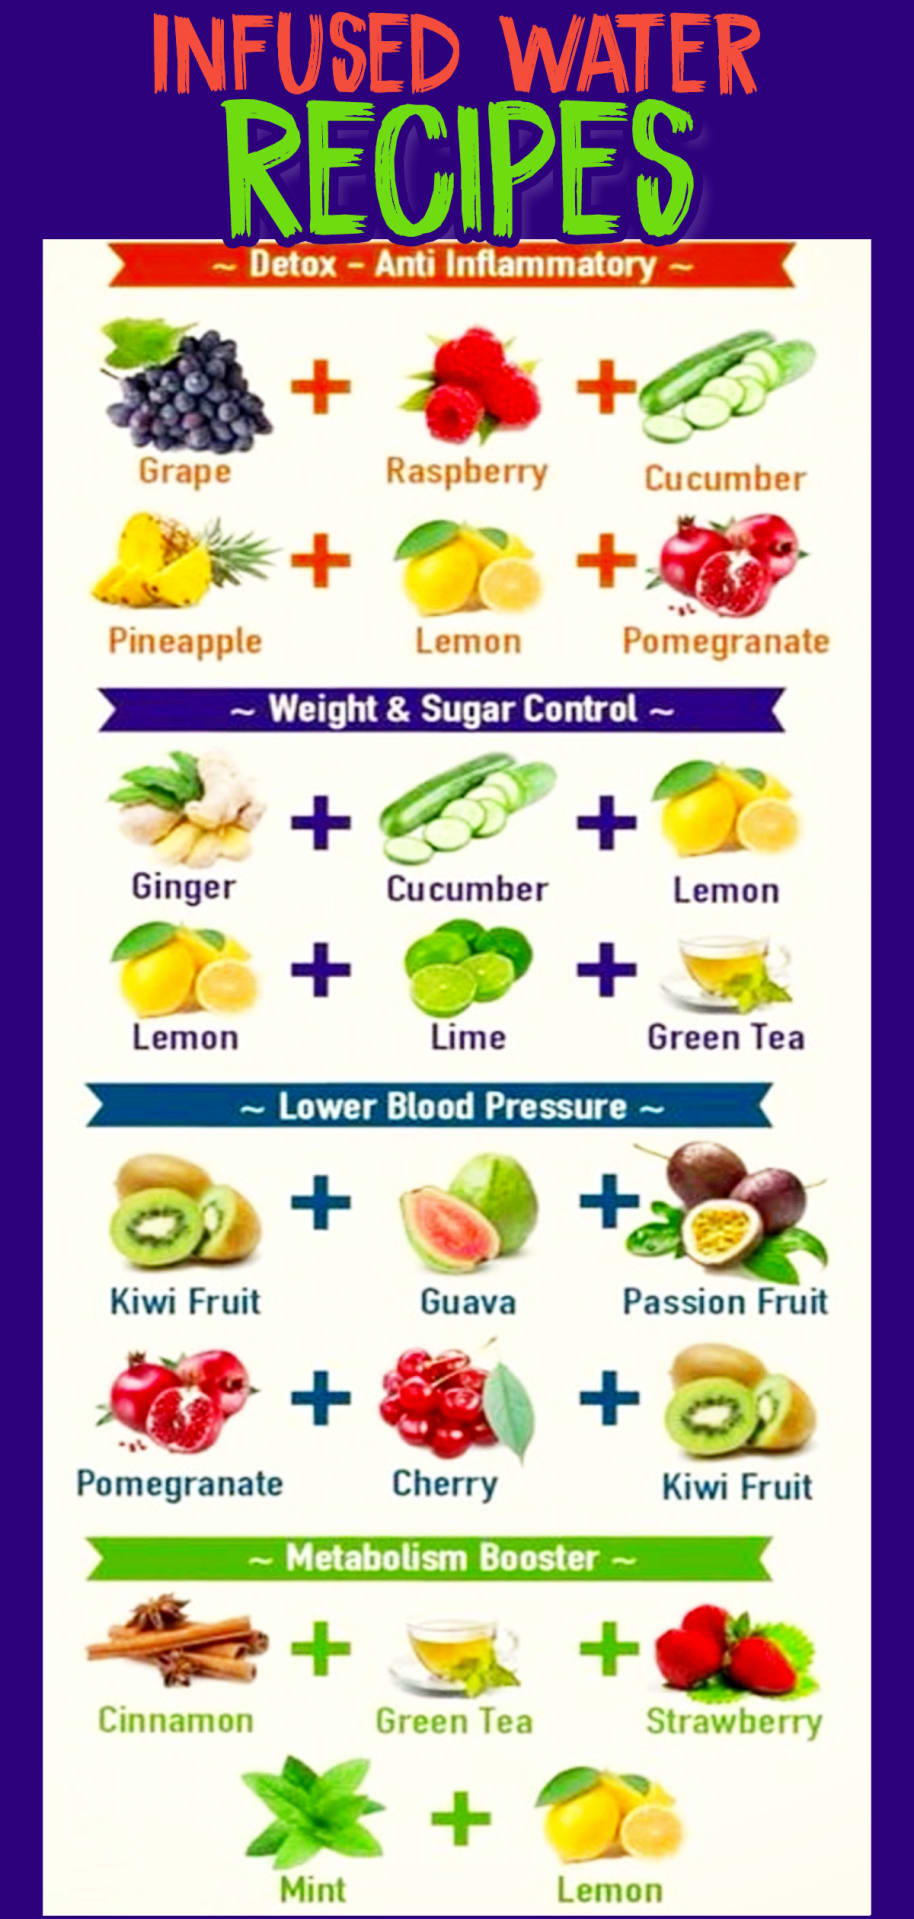 Infused Water Recipes For Weight Loss
 Infused Water Recipes and Benefits How To Make Fruit